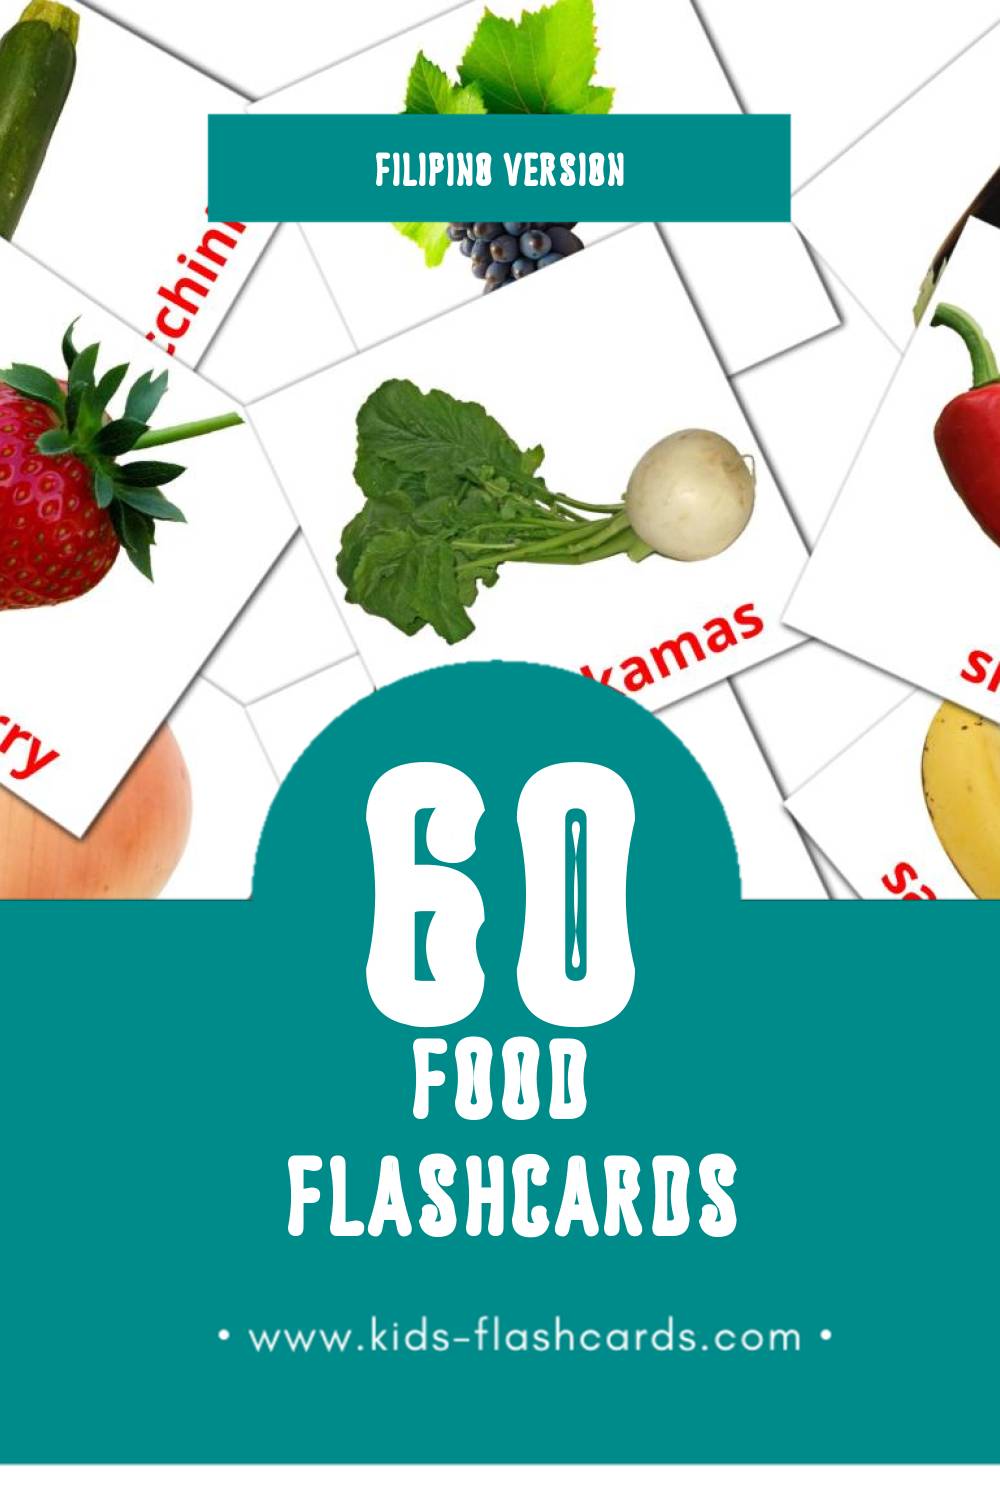 Visual Pagkain Flashcards for Toddlers (60 cards in Filipino)